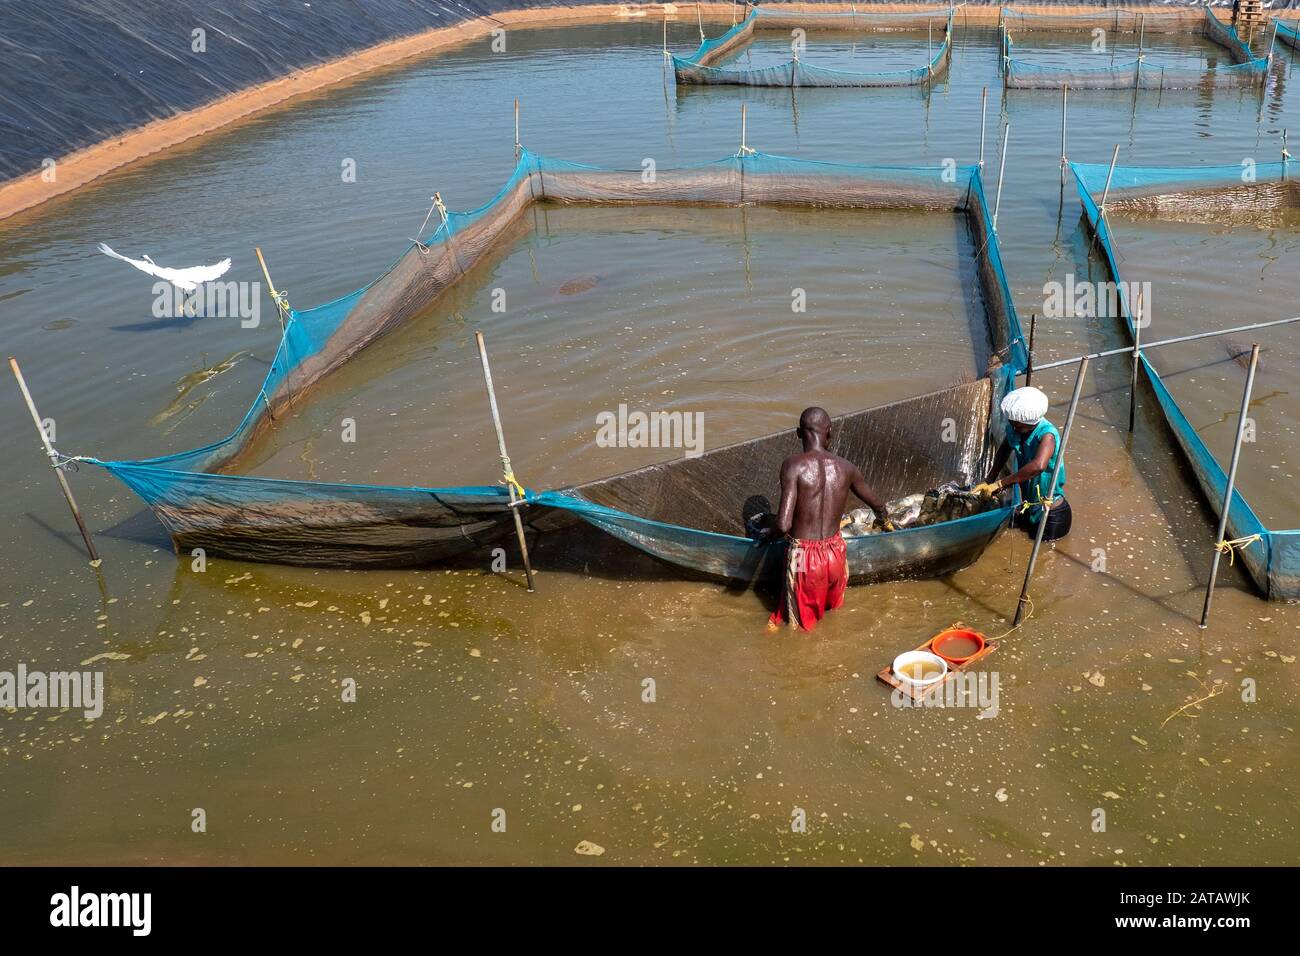 Employees of Victory Farms, the largest fish farmer in Kenya, sort breeding tilapia in a pond Stock Photo